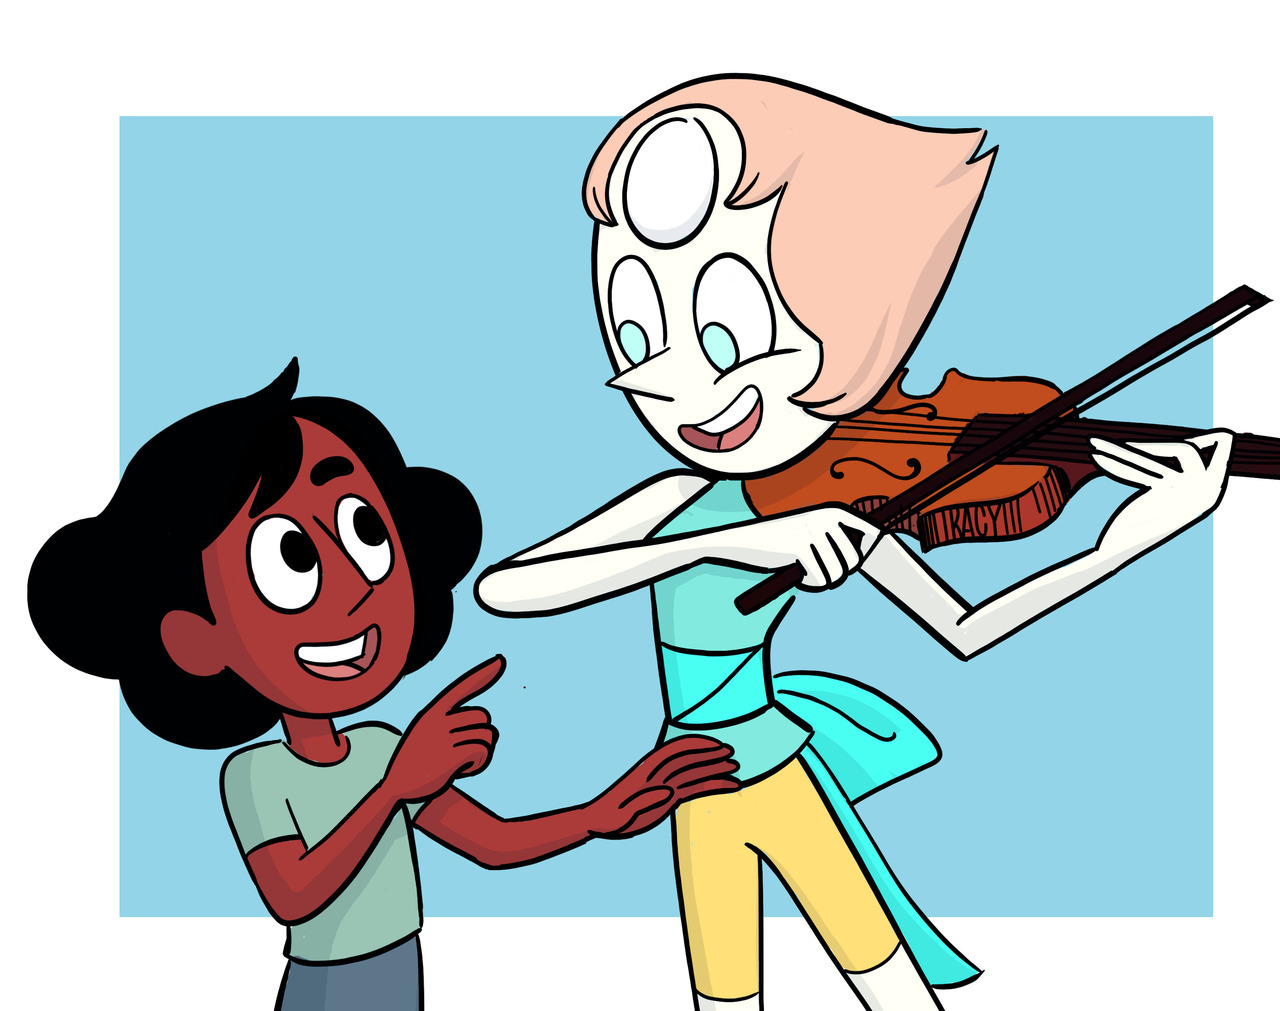 Originally, this was going to be Connie teaching Pearl how to play violin, in a nice little ‘student becomes the teacher’ moment… but during my research for references I found out Pearl already knows!...